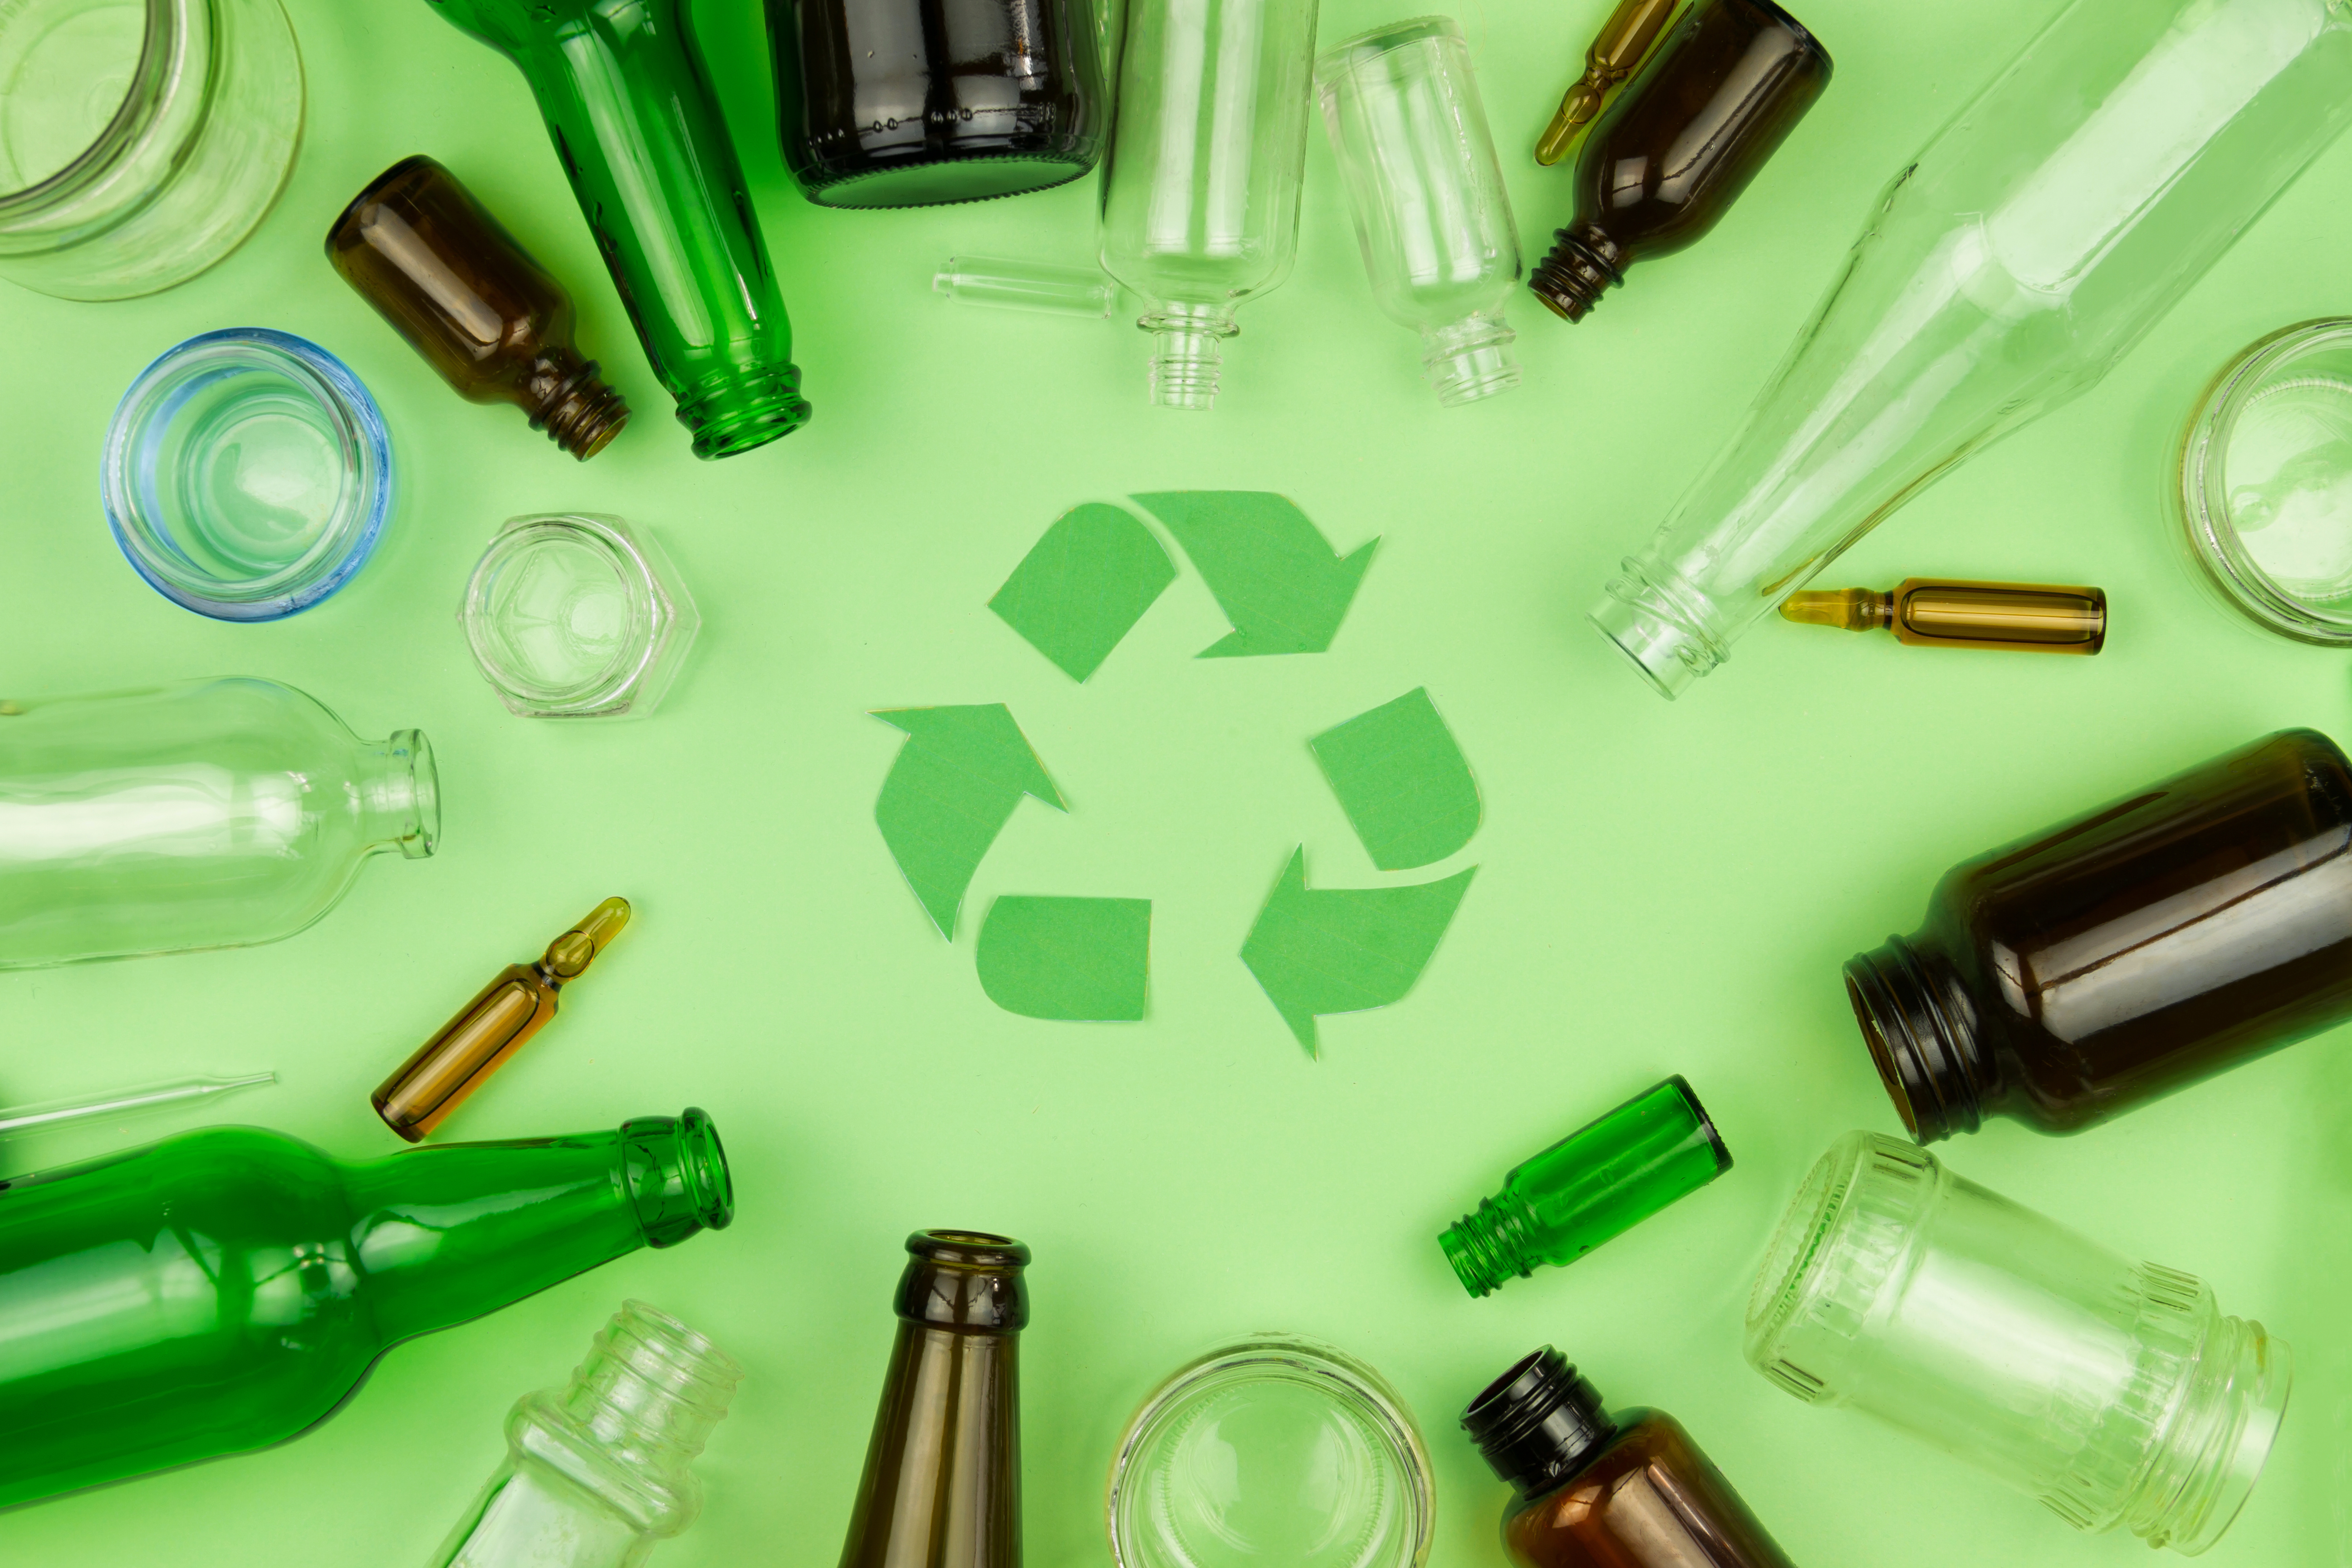 25 Plastic Items You Can Melt Down and Reuse